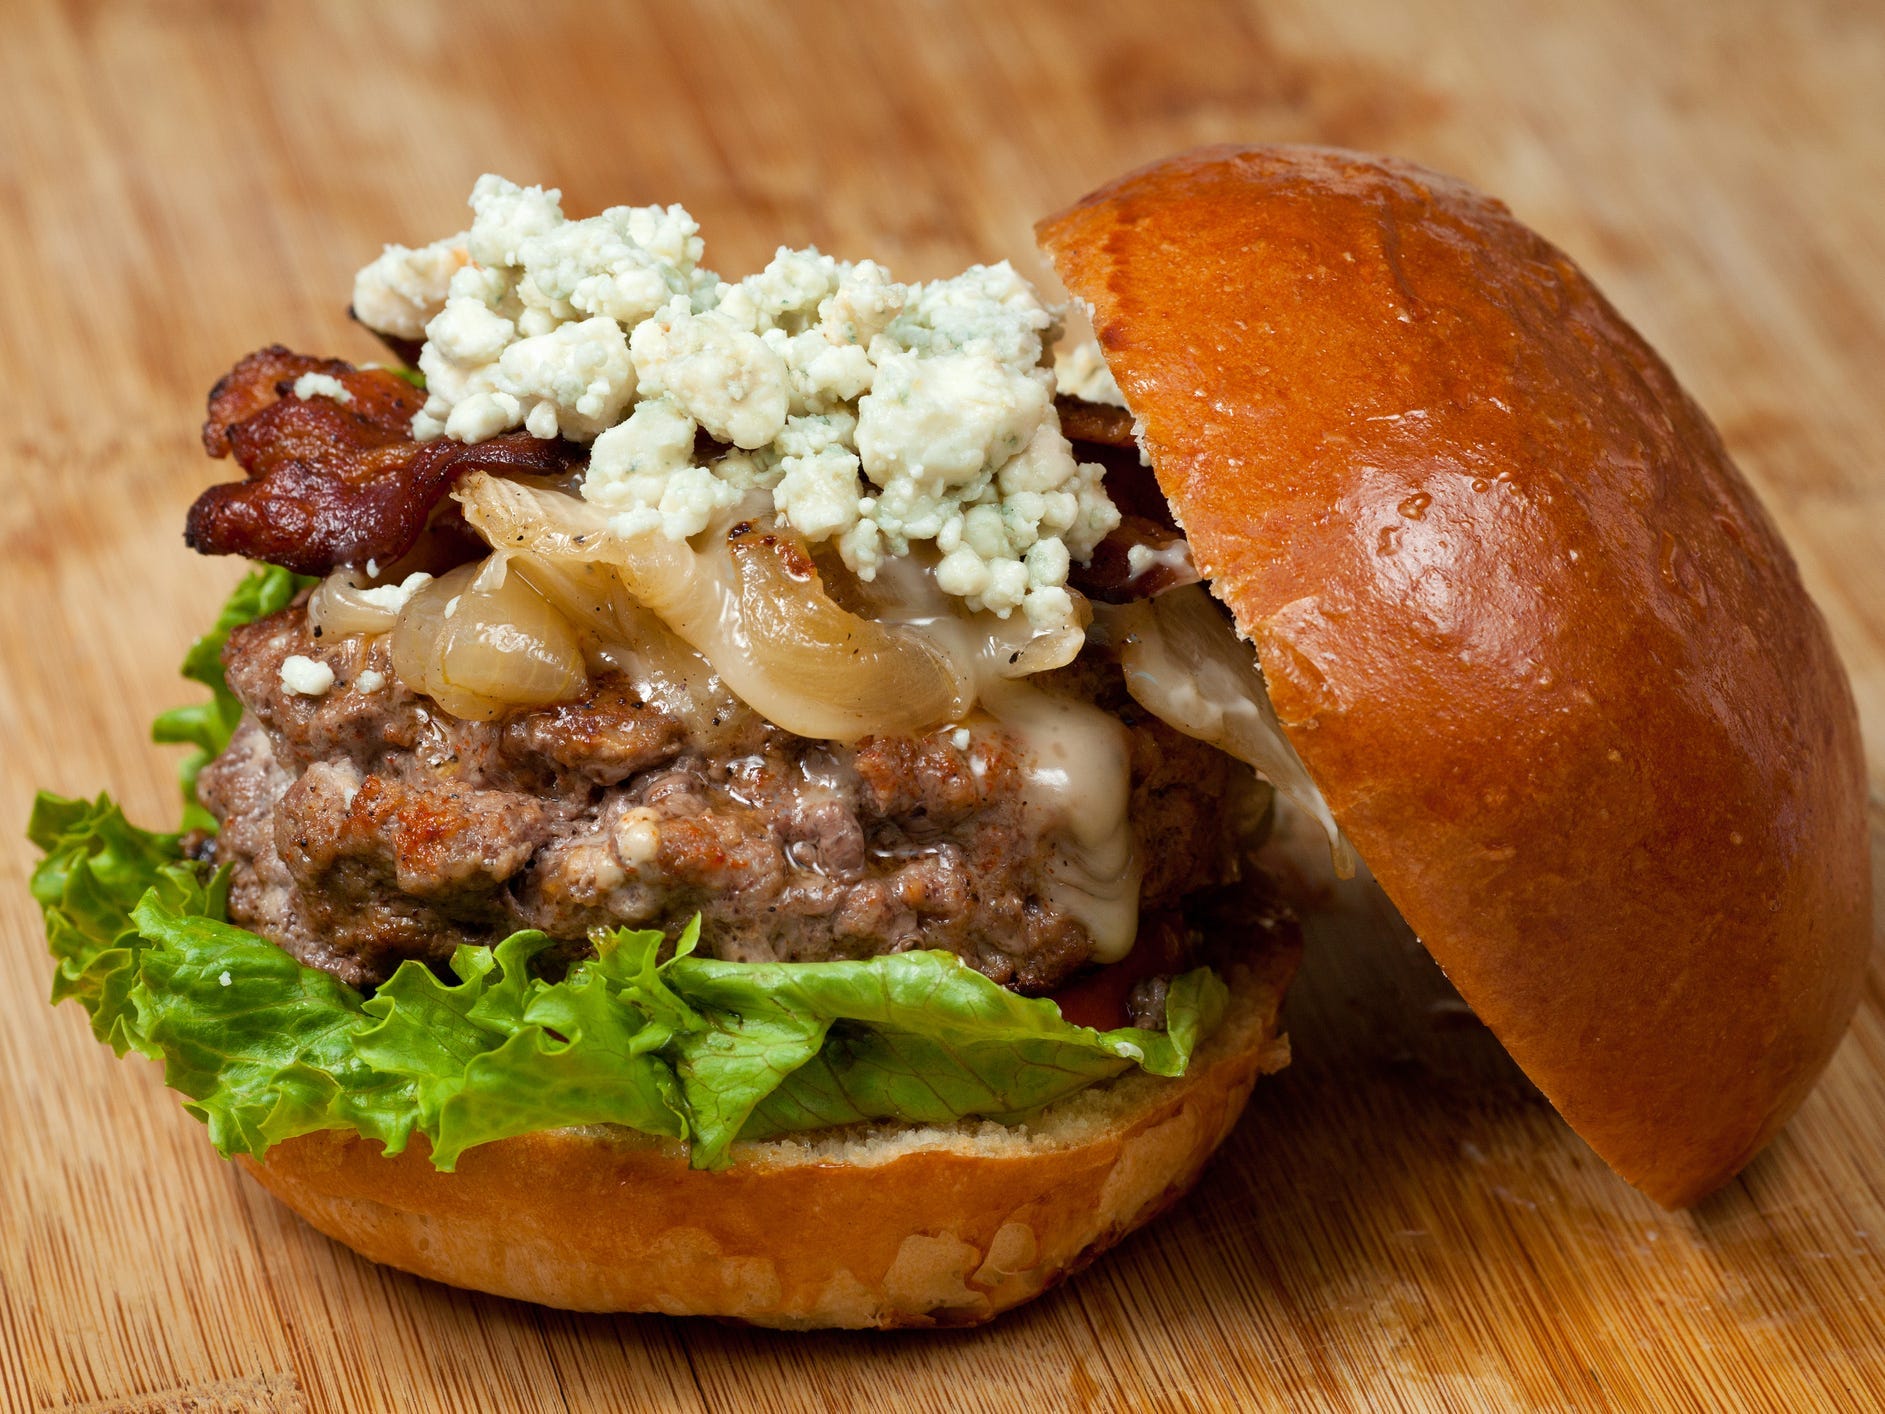 A hamburger topped with blue cheese, bacon, and caramelized onions